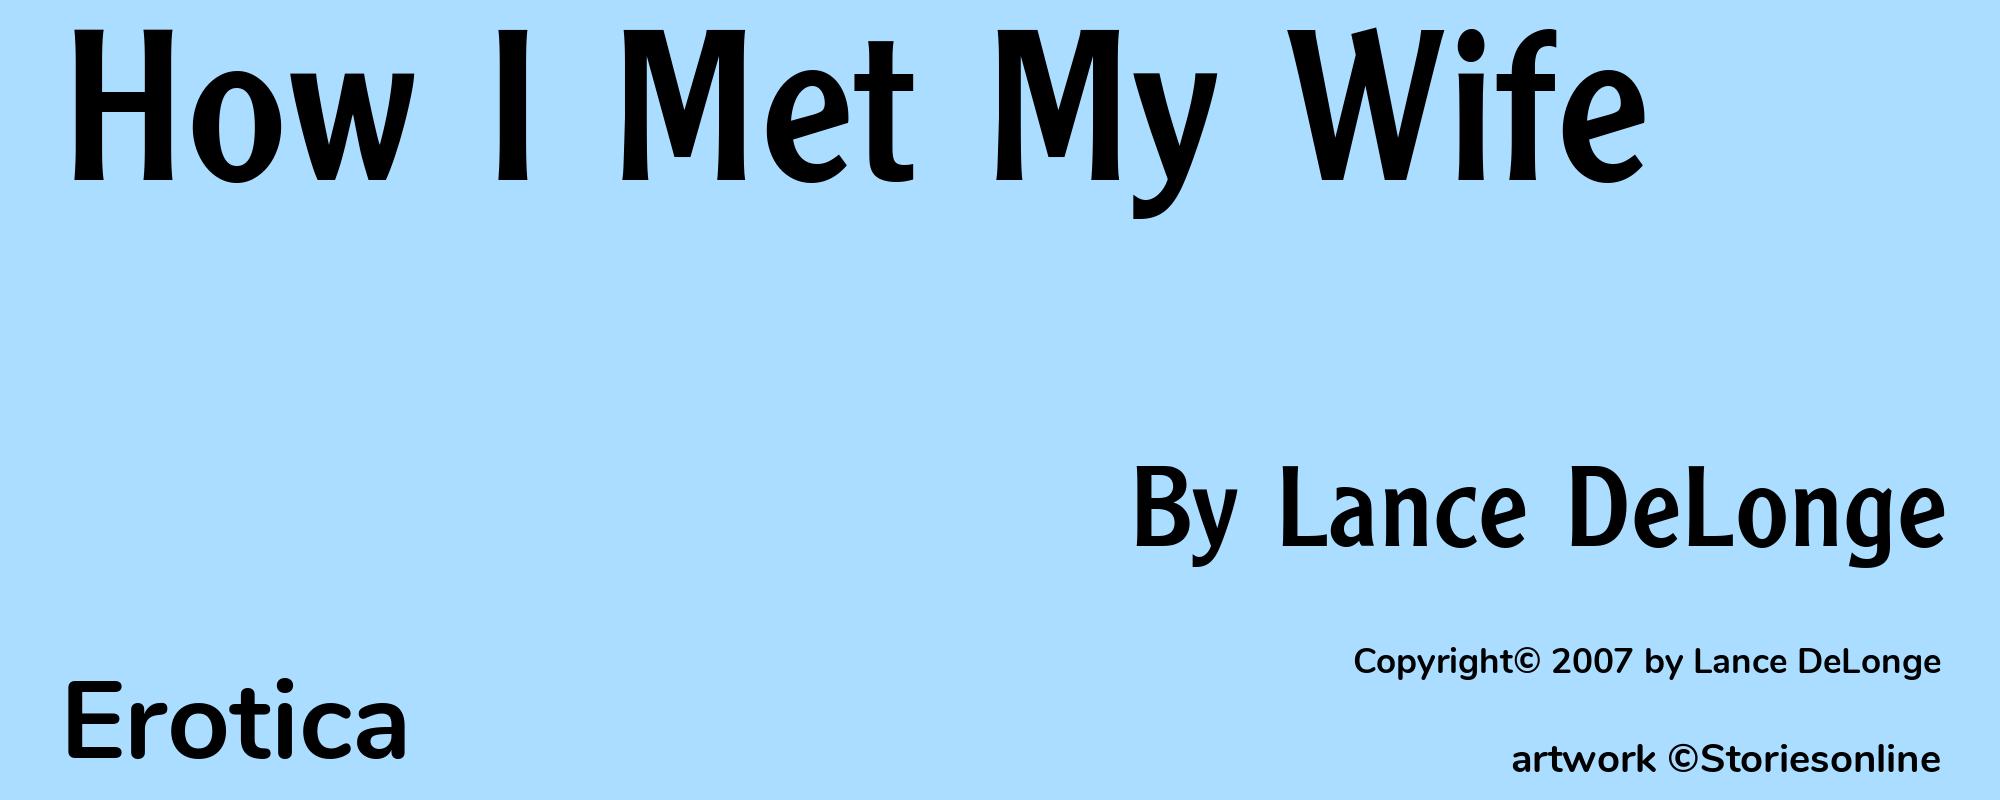 How I Met My Wife - Cover